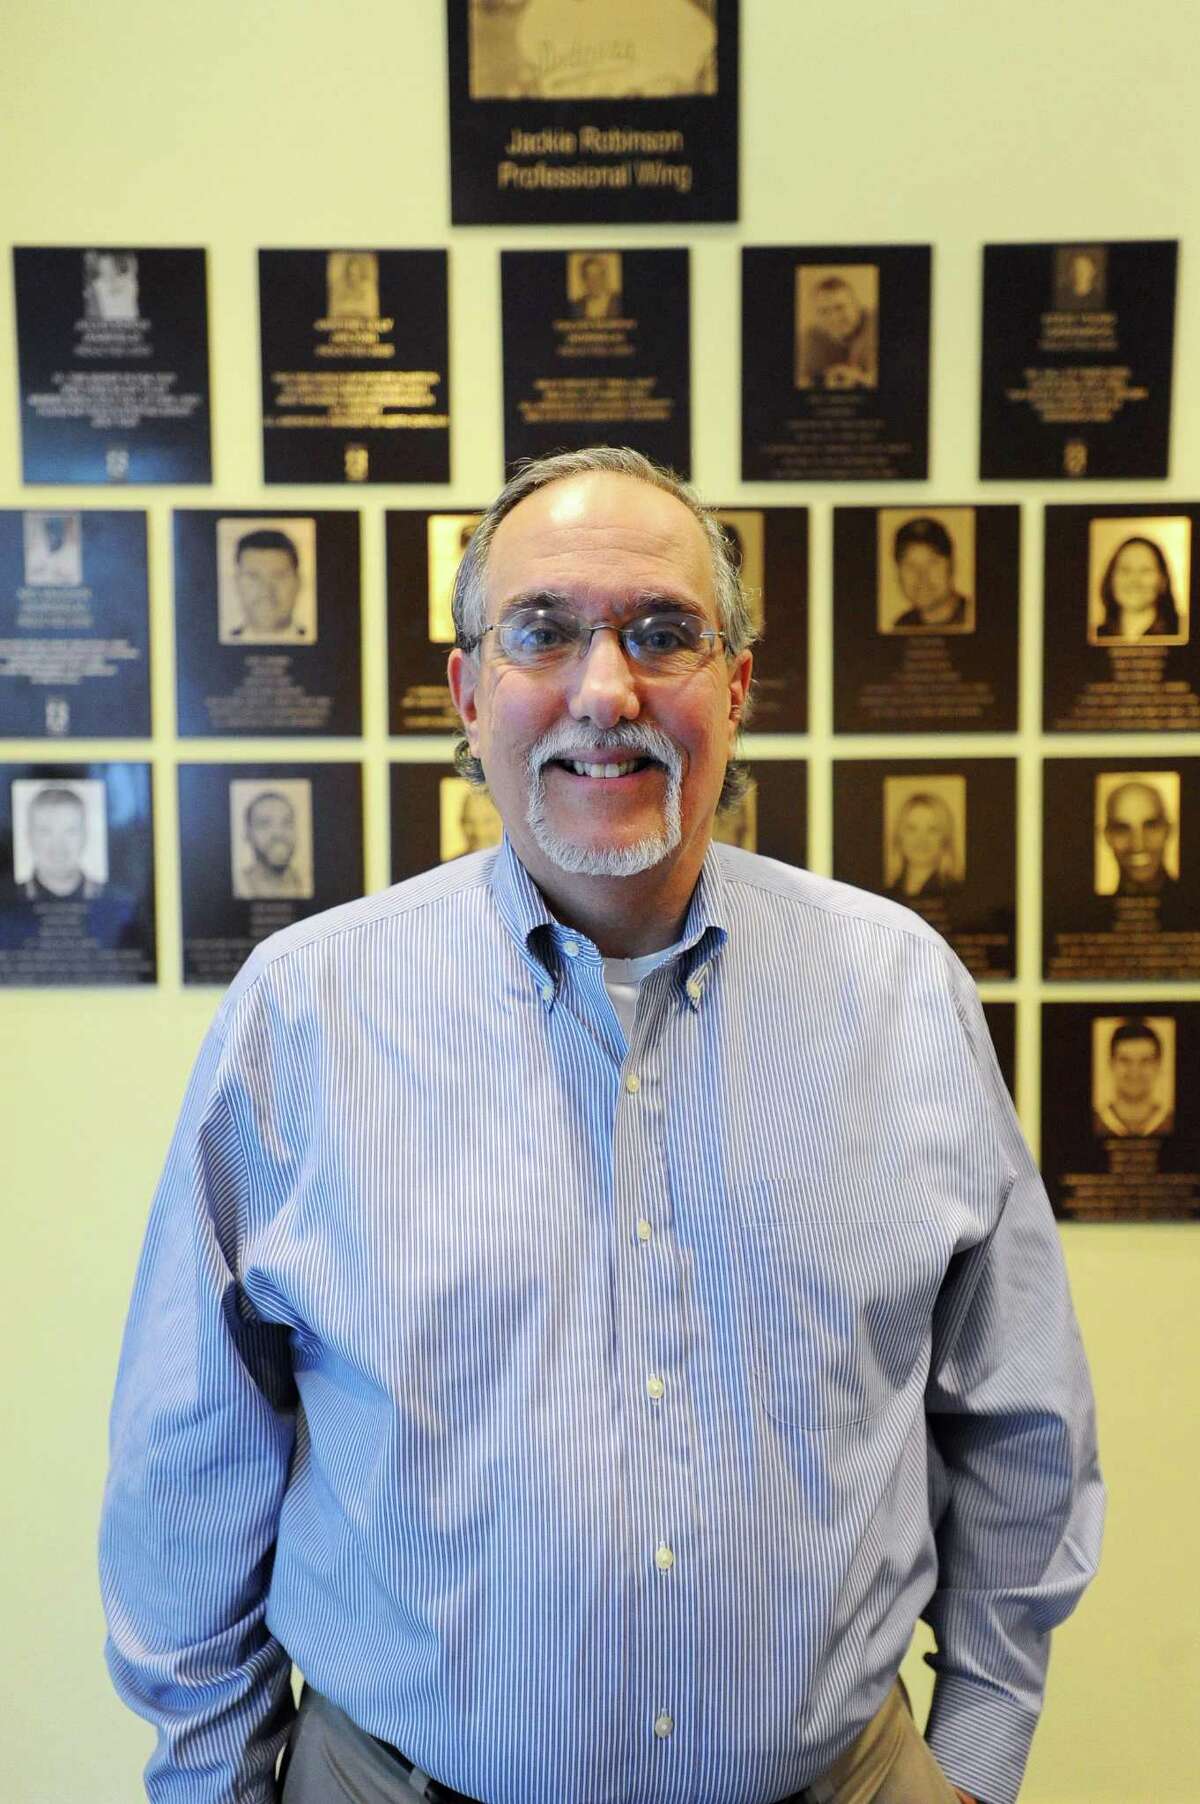 Tom Chiappetta, executive director of the Fairfield County Sports Commission, poses for a photo in front of the Fairfield County Sports Hall of Fame inside UConn Stamford in Stamford, Conn. on Tuesday, March 28, 2017.